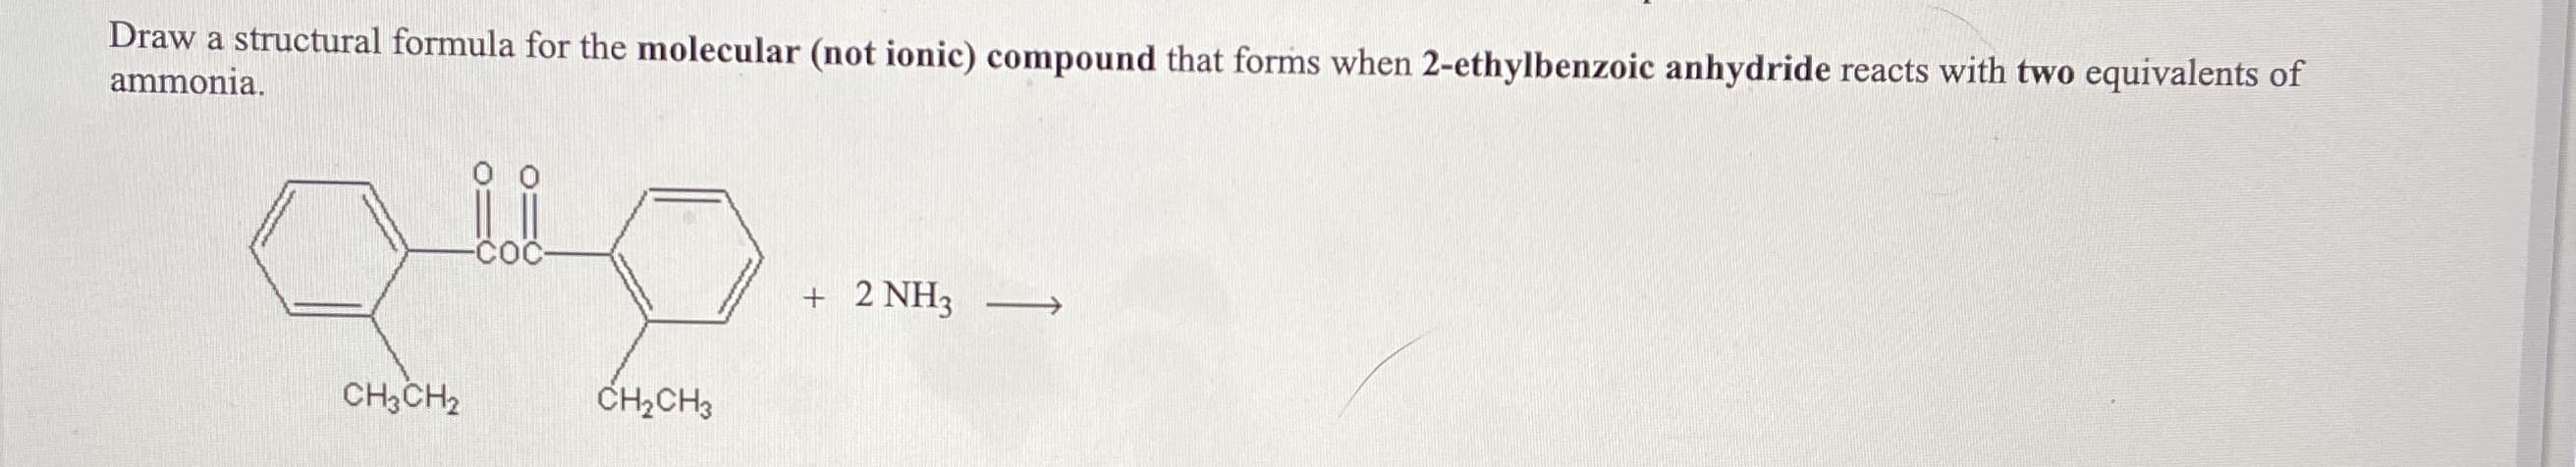 Draw a structural formula for the molecular (not ionic) compound that forms when 2-ethylbenzoic anhydride reacts with two equivalents of
ammonia.
+ 2 NH3
CH3CH2
CH2CH3
